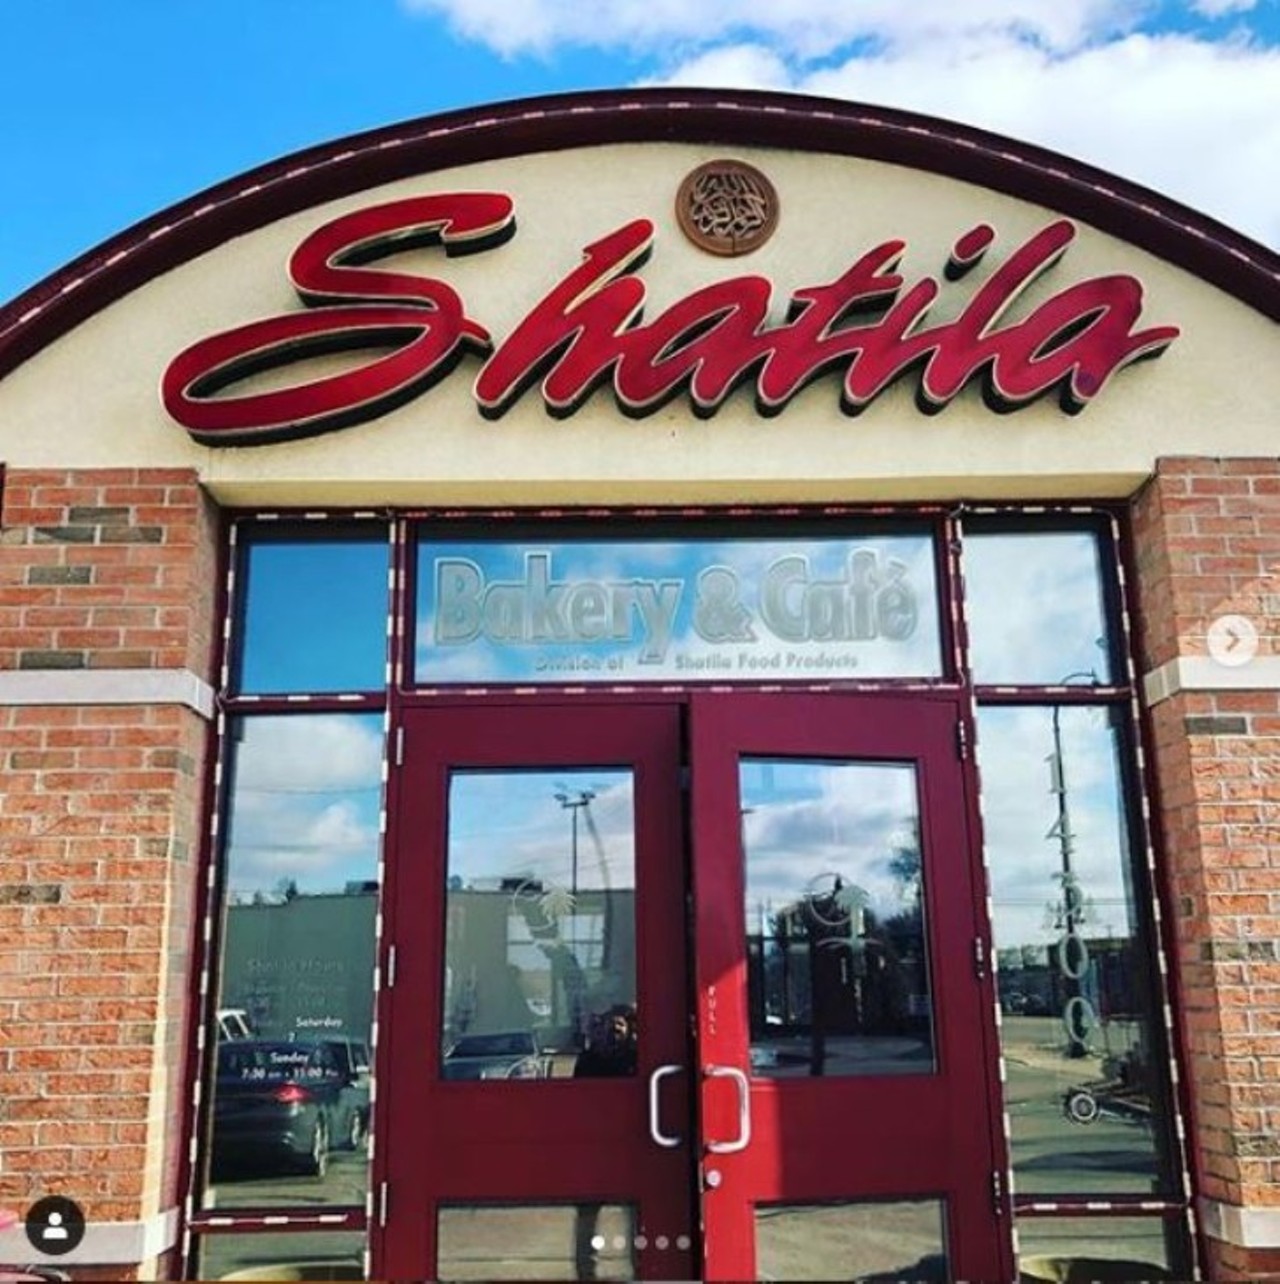 Shatila Bakery & Cafe
14300 W. Warren Ave.; Dearborn; 313-582-1952
In 2019, Shatila will celebrate 40 years of serving metro Detroit with a fine selection of Middle Eastern desserts. Although Shatila has expanded to have multiple locations, the Dearborn location is the flagship bakery where you will find traditional knafeh, kashta, mamoul, and of course, baklava.
Photo courtesy of Instagram user mirkhalidali